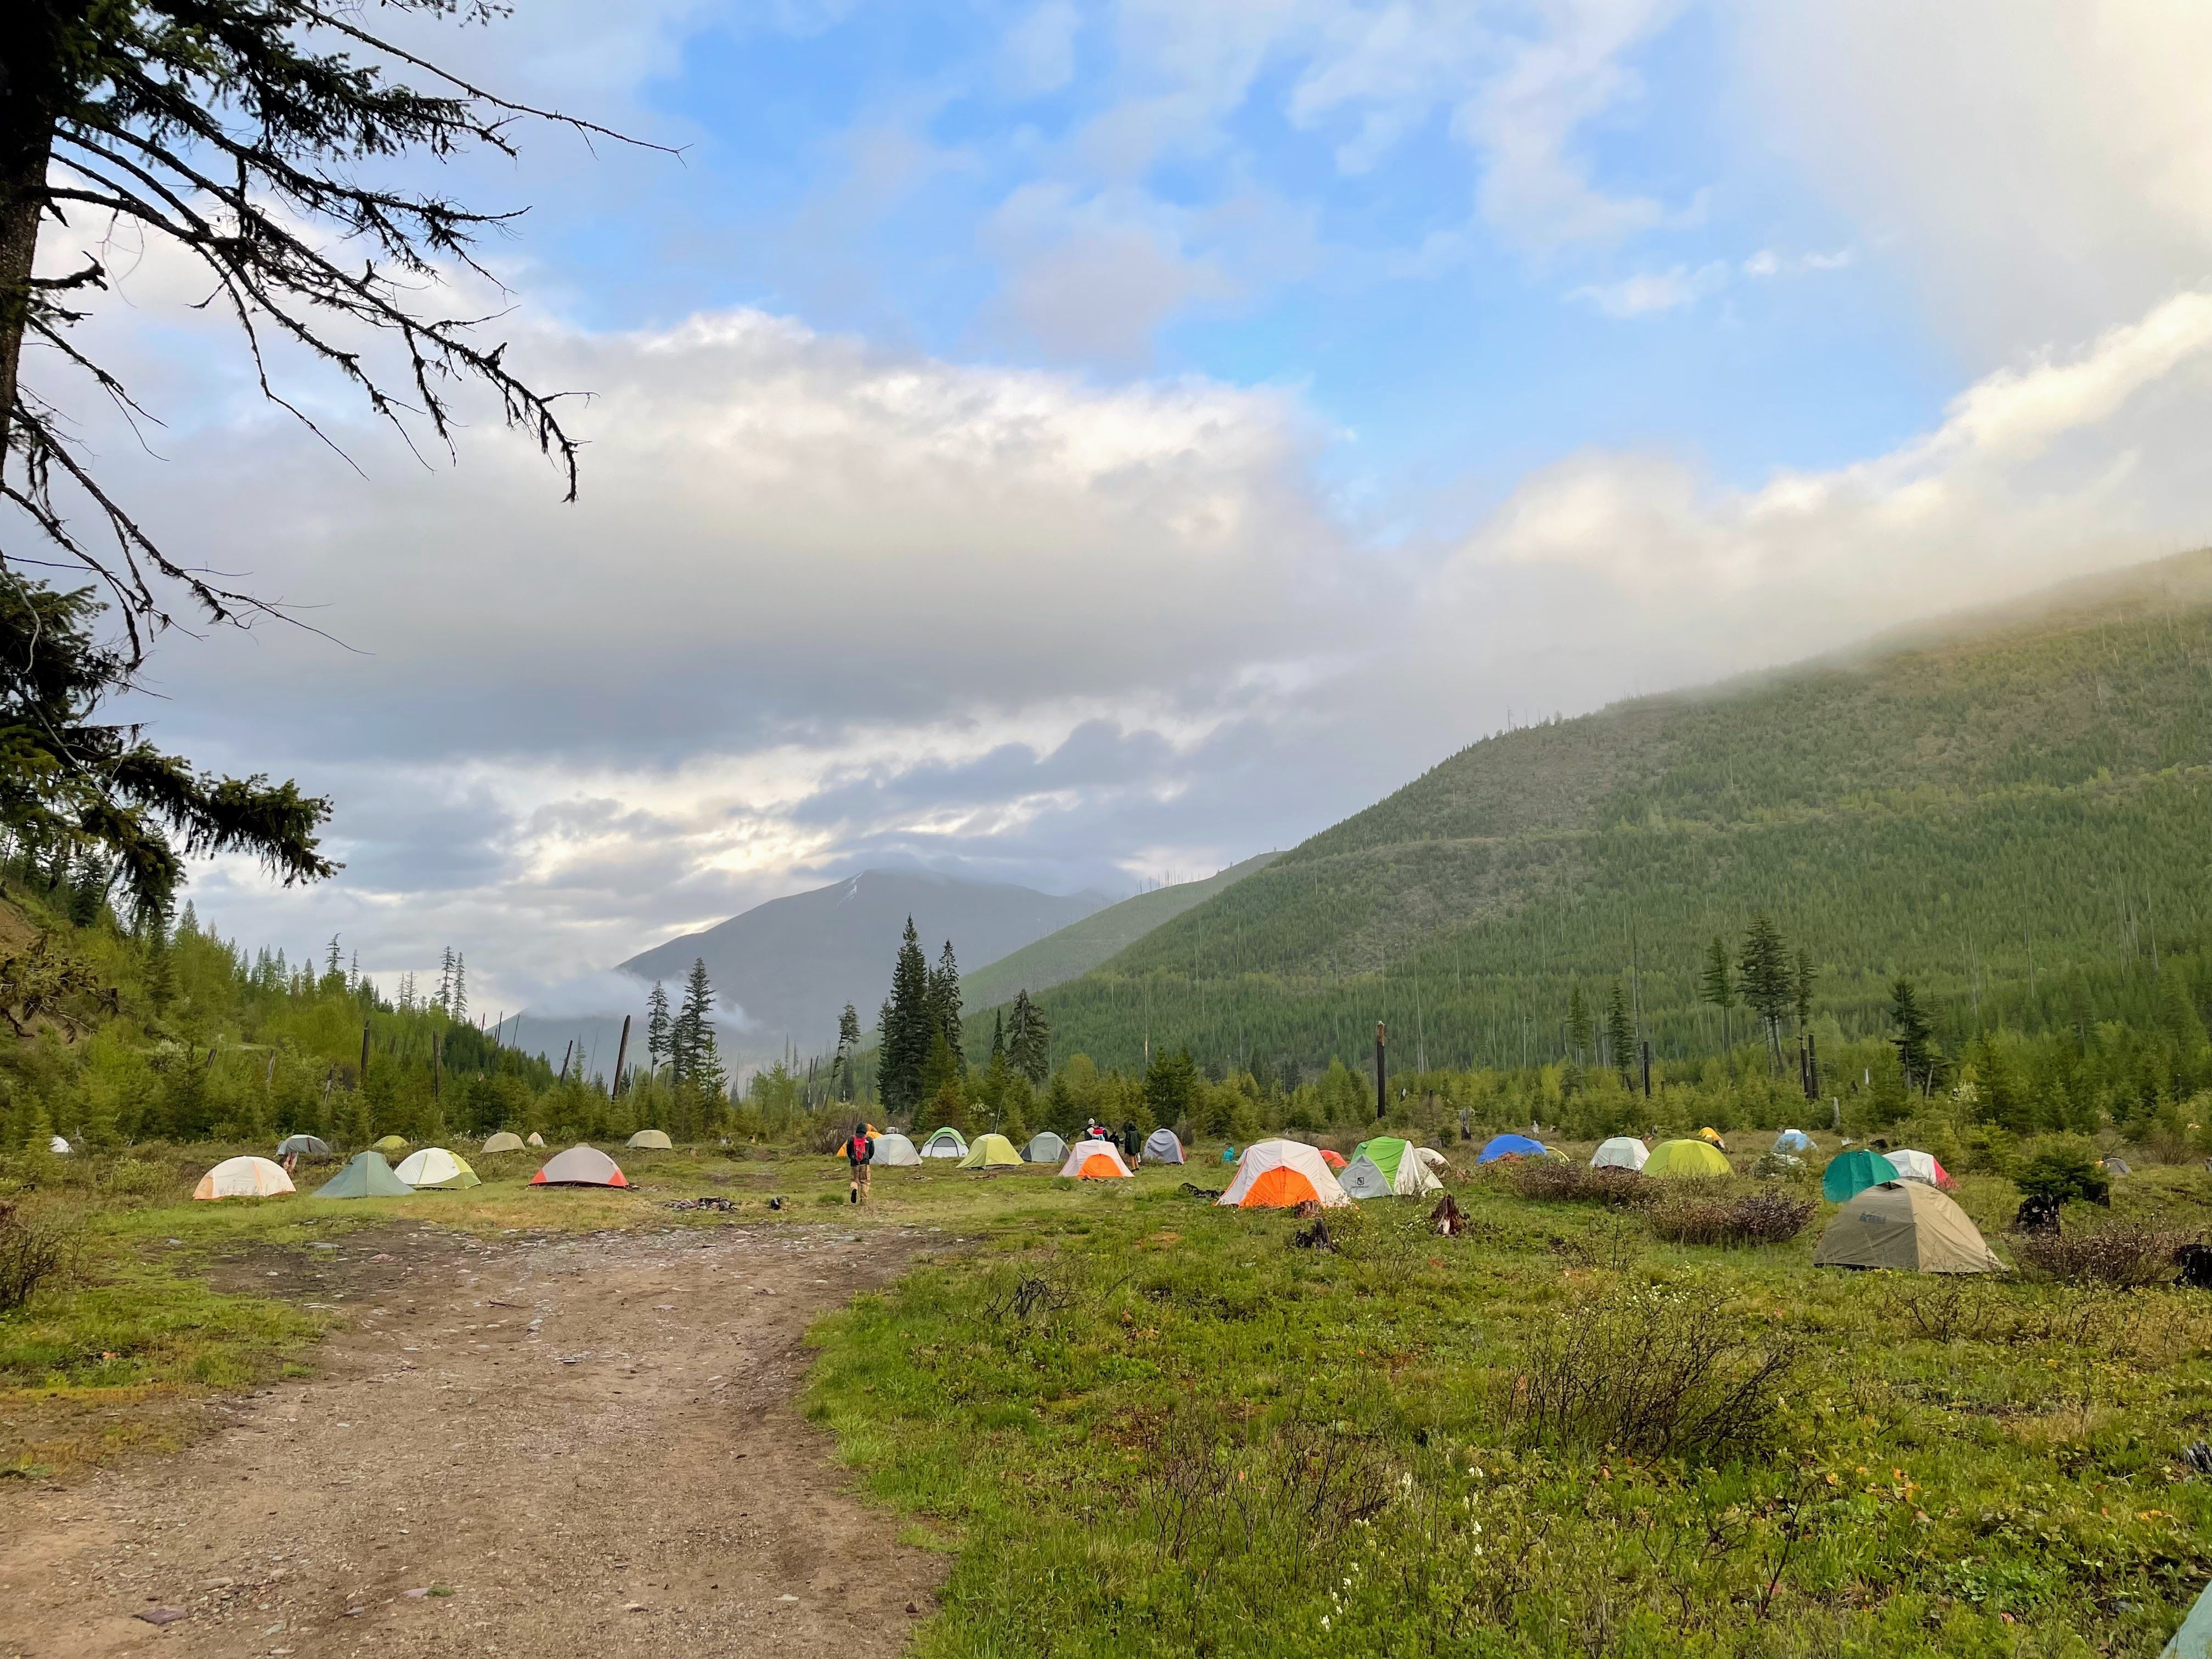 A field of tents